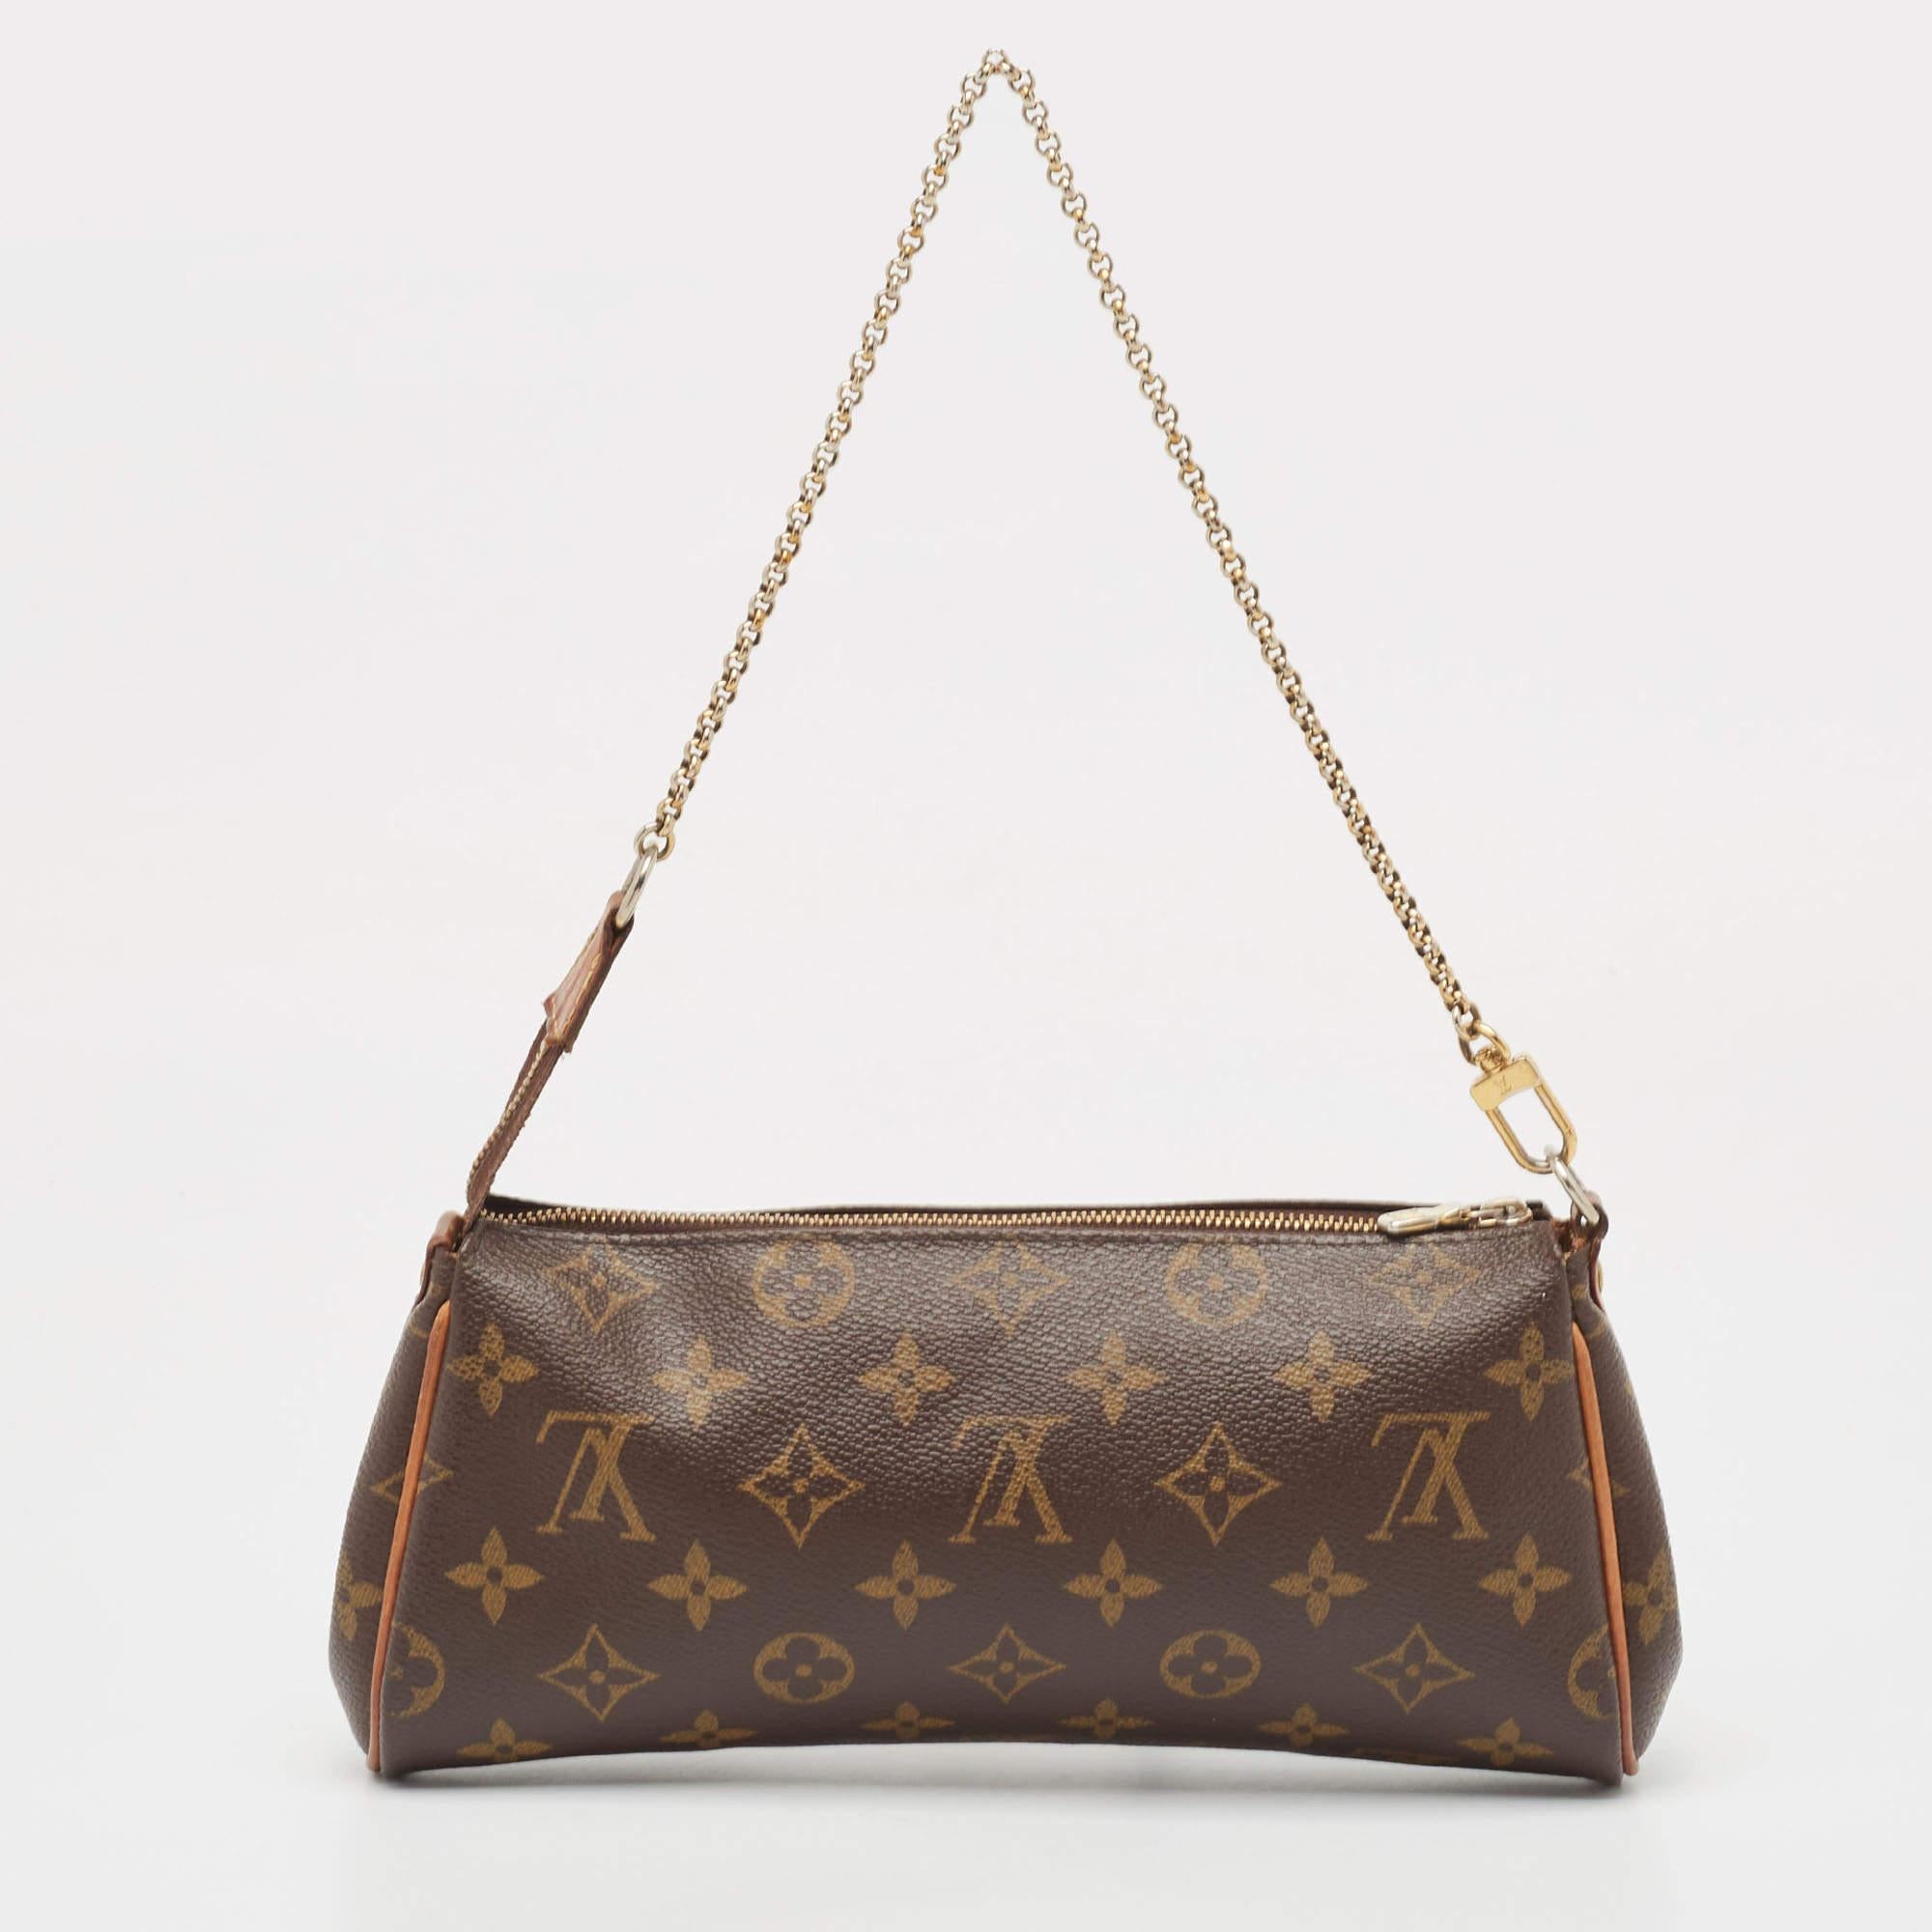 Crafted from Monogram canvas, this Eva Pochette bag is an adored creation by Louis Vuitton. The bag features a well-sized canvas interior that is secured by a gold-tone zipper. It comes with a chain and a leather strap.

Includes: invoice, Original